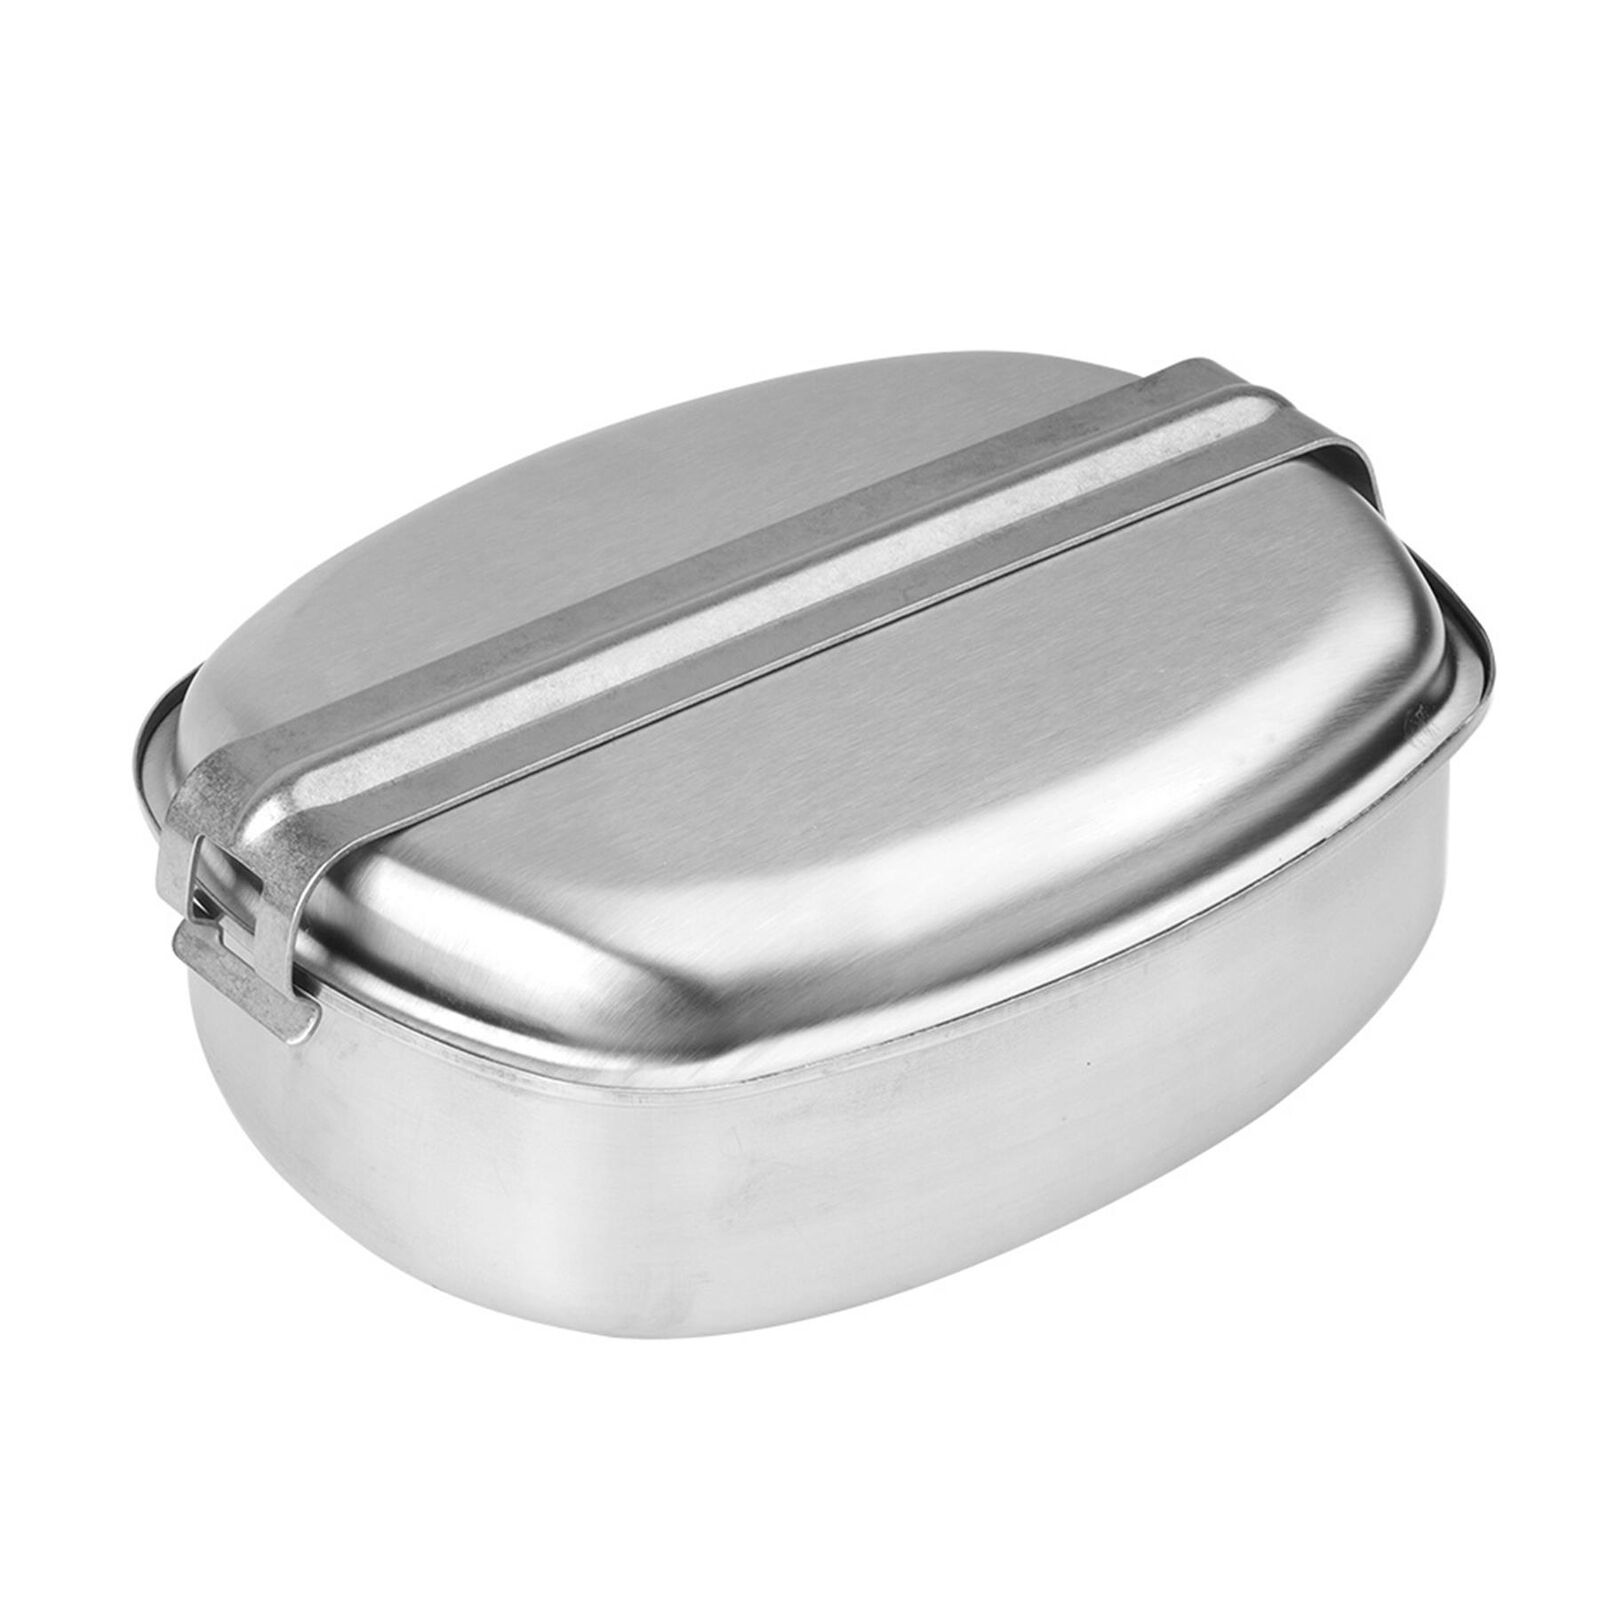 MIL-TEC French military-style mess kit stainless steel campfire cookware pan lid